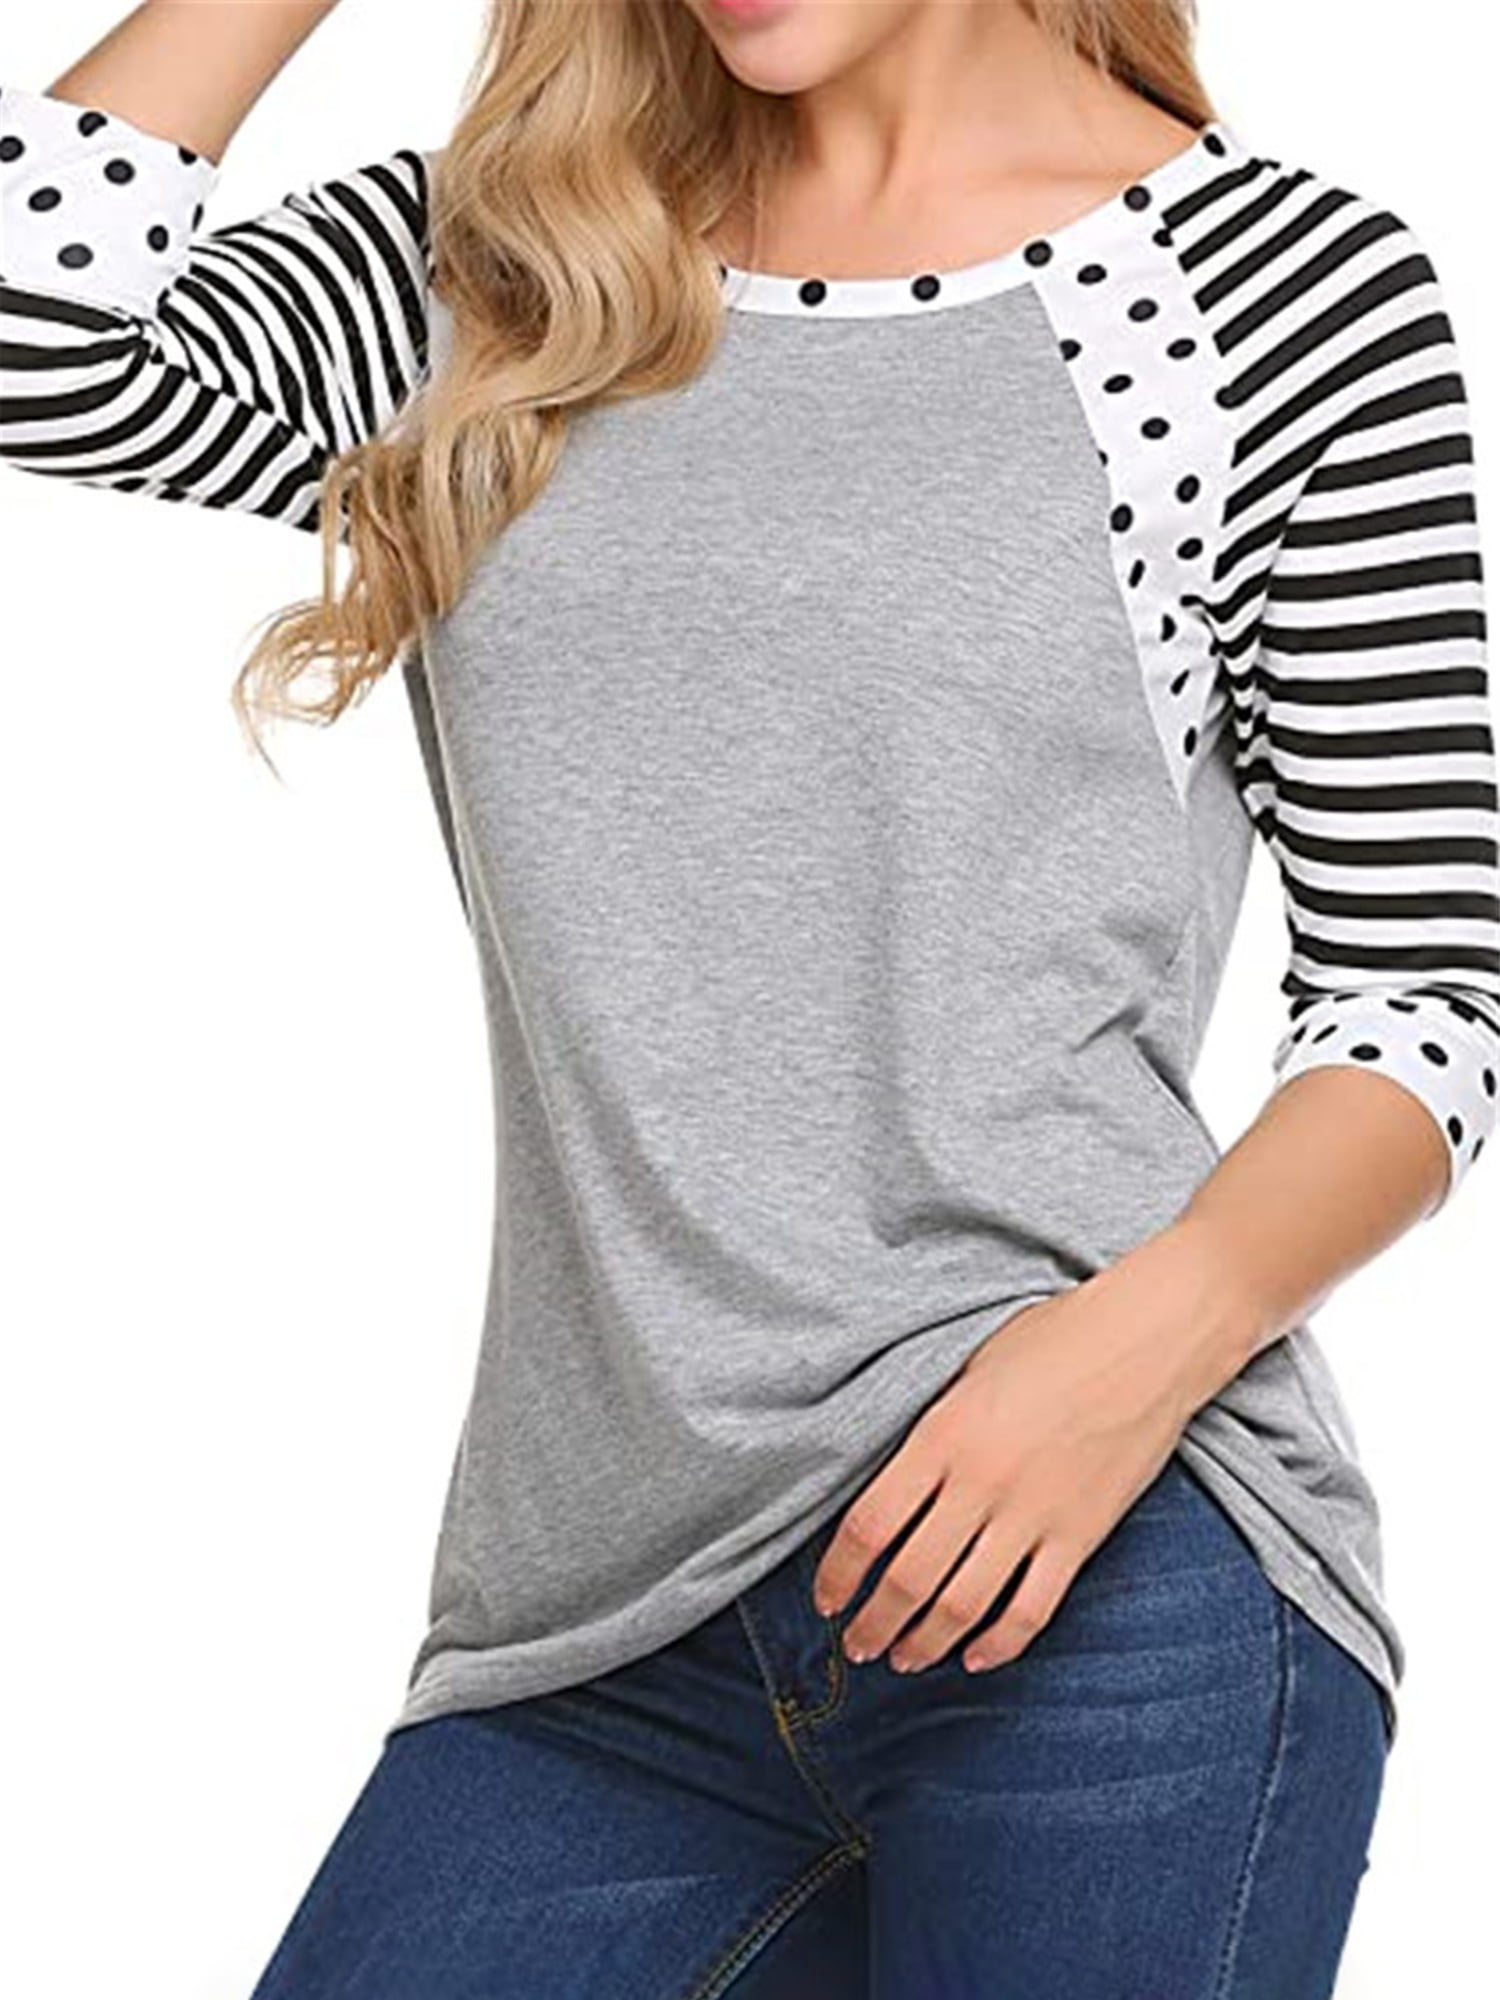 ZBYY Womens 3//4 Bell Sleeve Sweatshirt Fashion Crewneck Casual Loose Tie-Dye Printed Blouses Tops Shirt Pullover